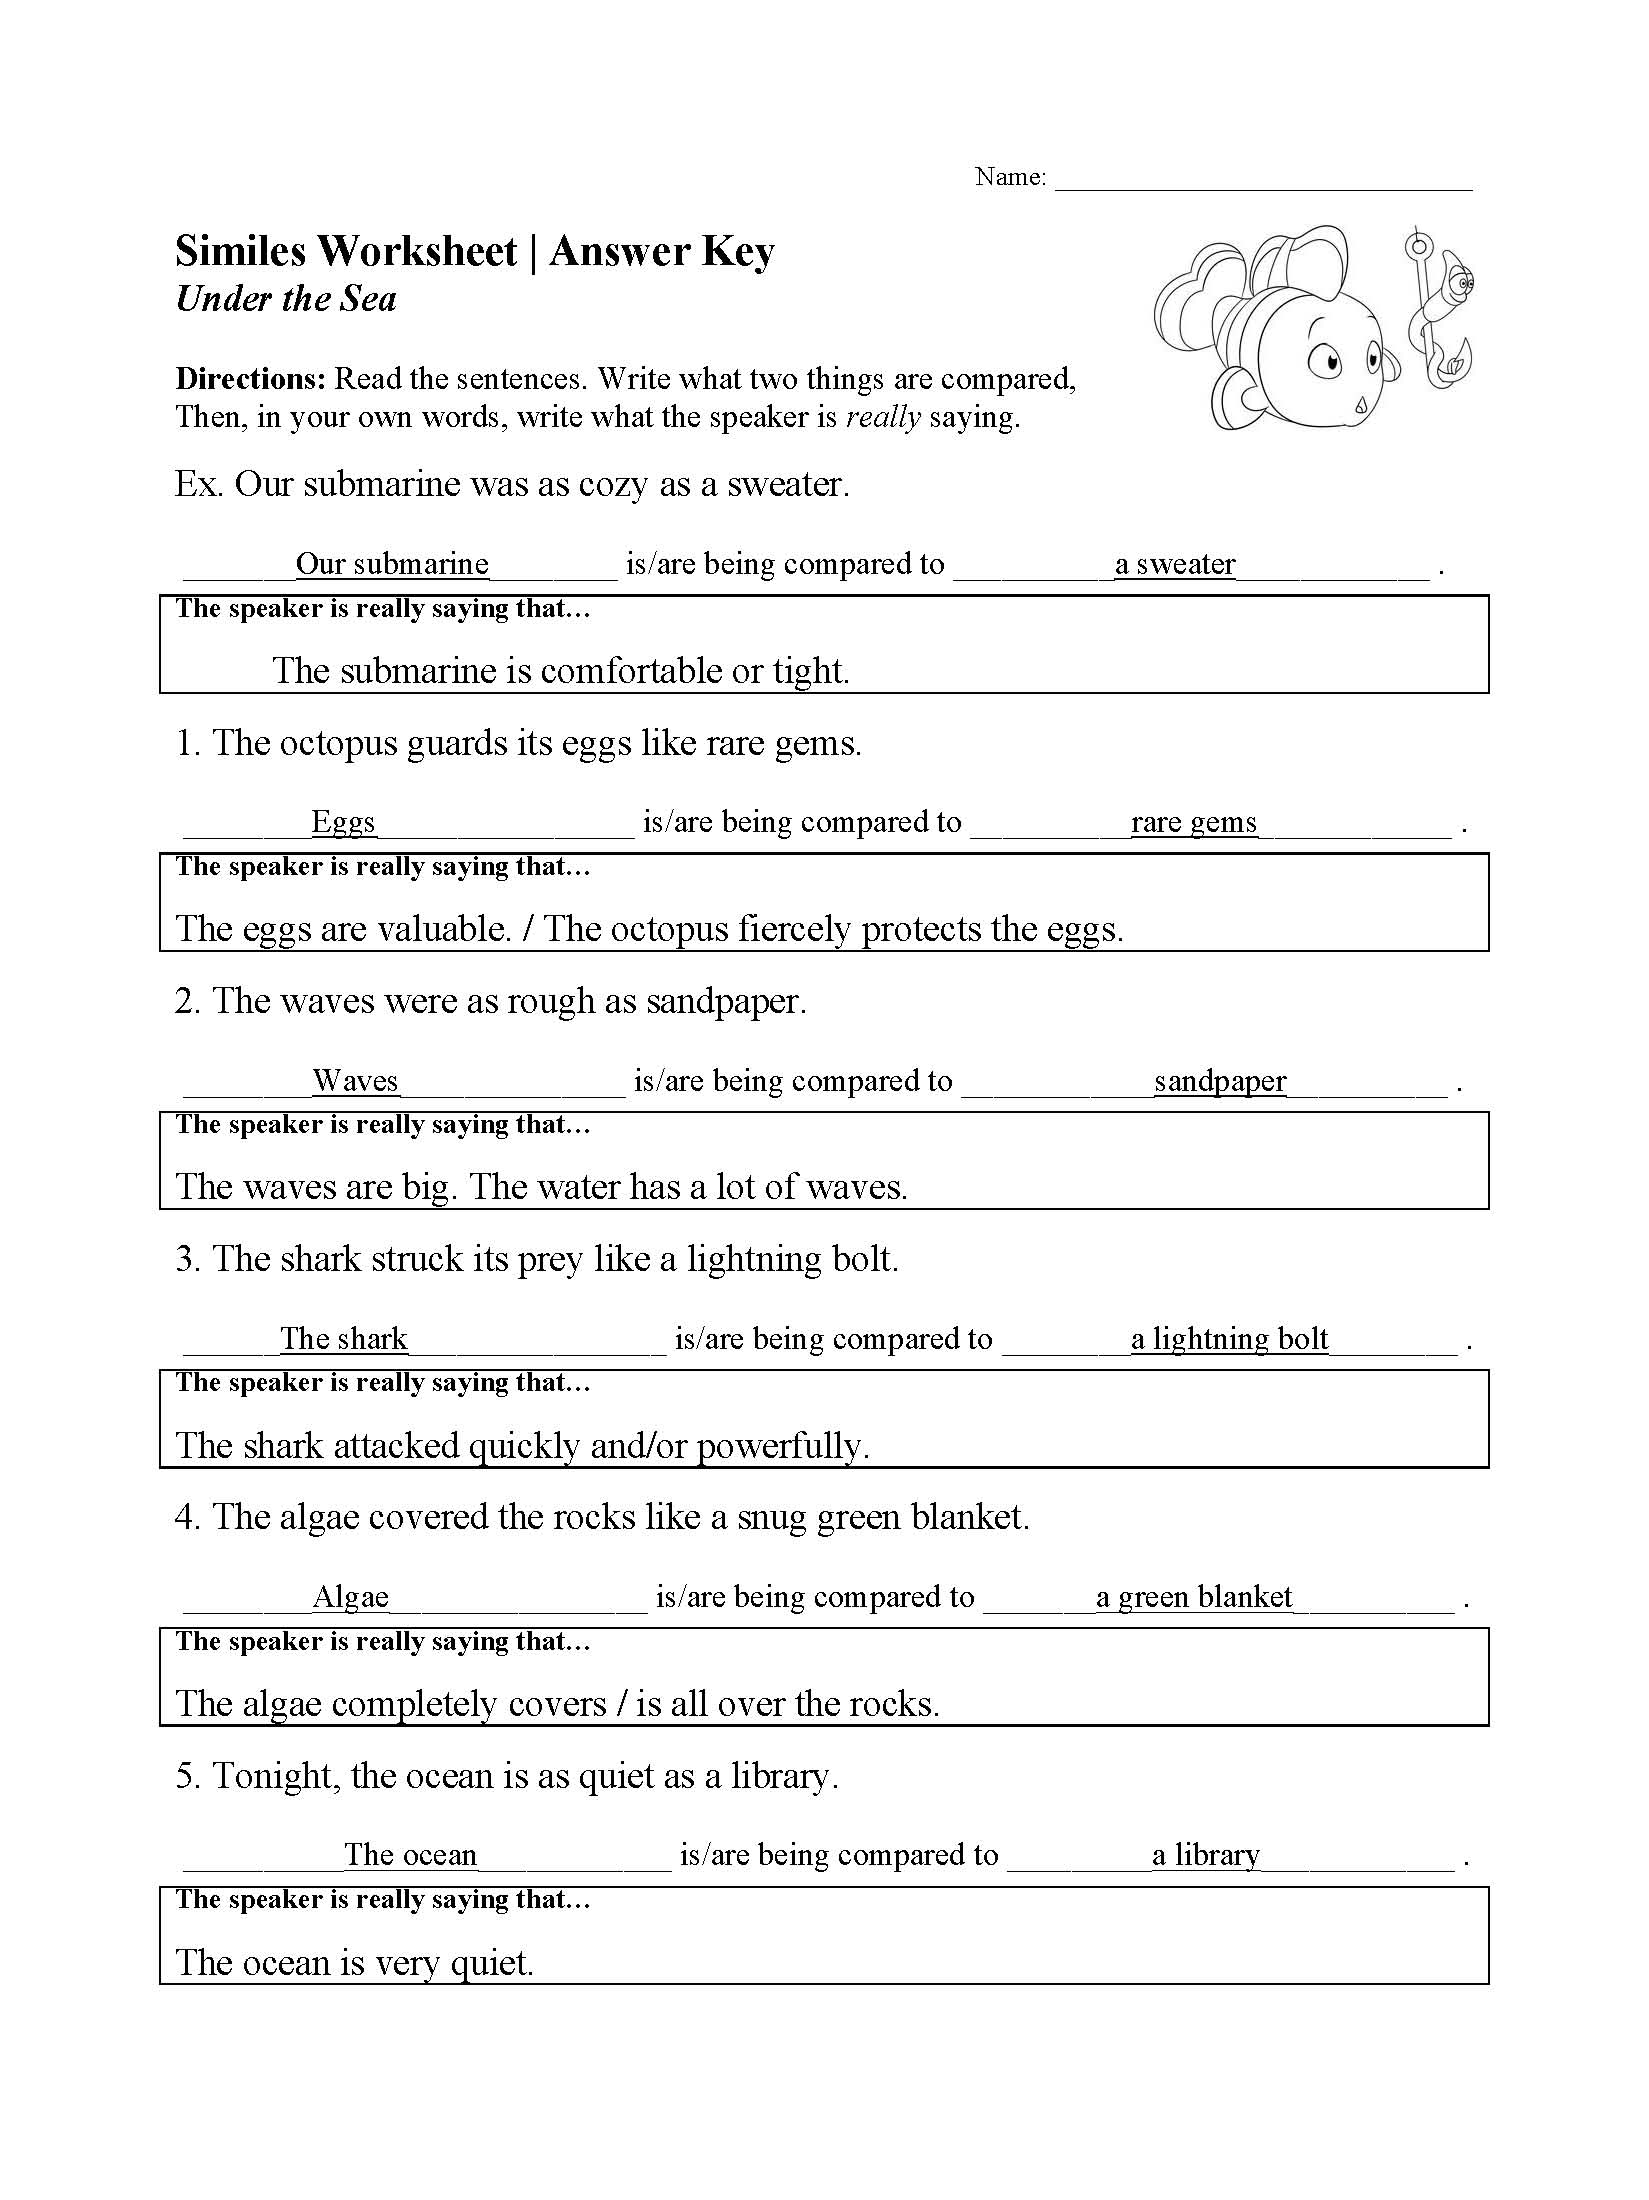 This is a preview image of our Simile Worksheet. Click on it to enlarge or view the source file.